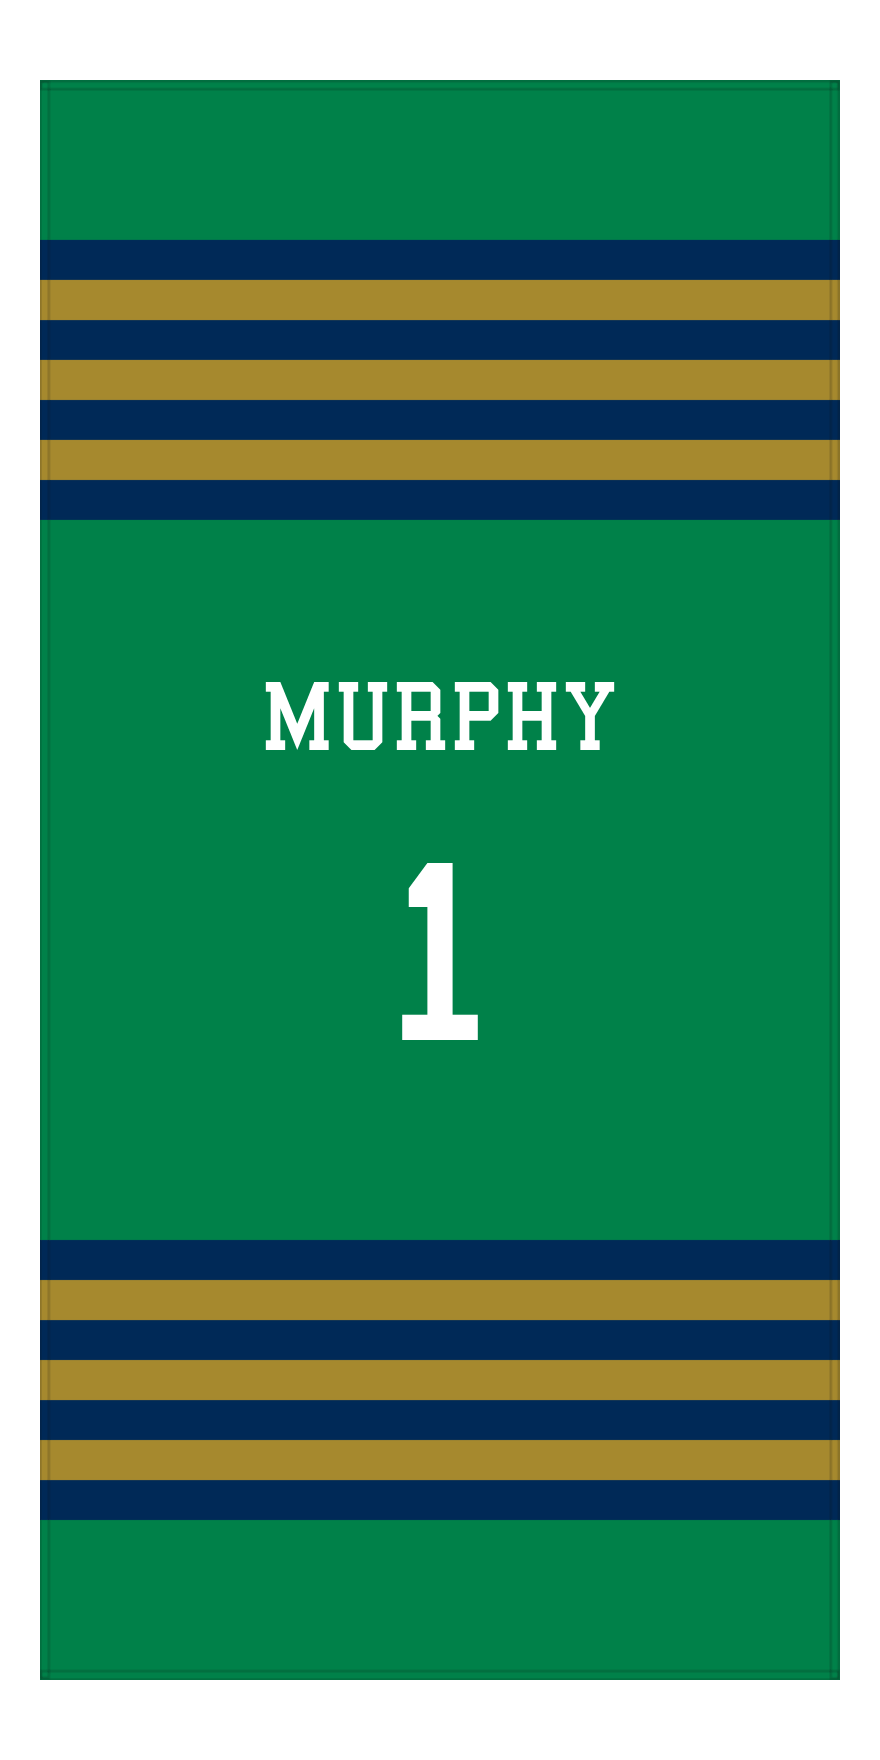 Personalized Jersey Number 3-on-1 Stripes Sports Beach Towel - Green and Gold - Vertical Design - Front View